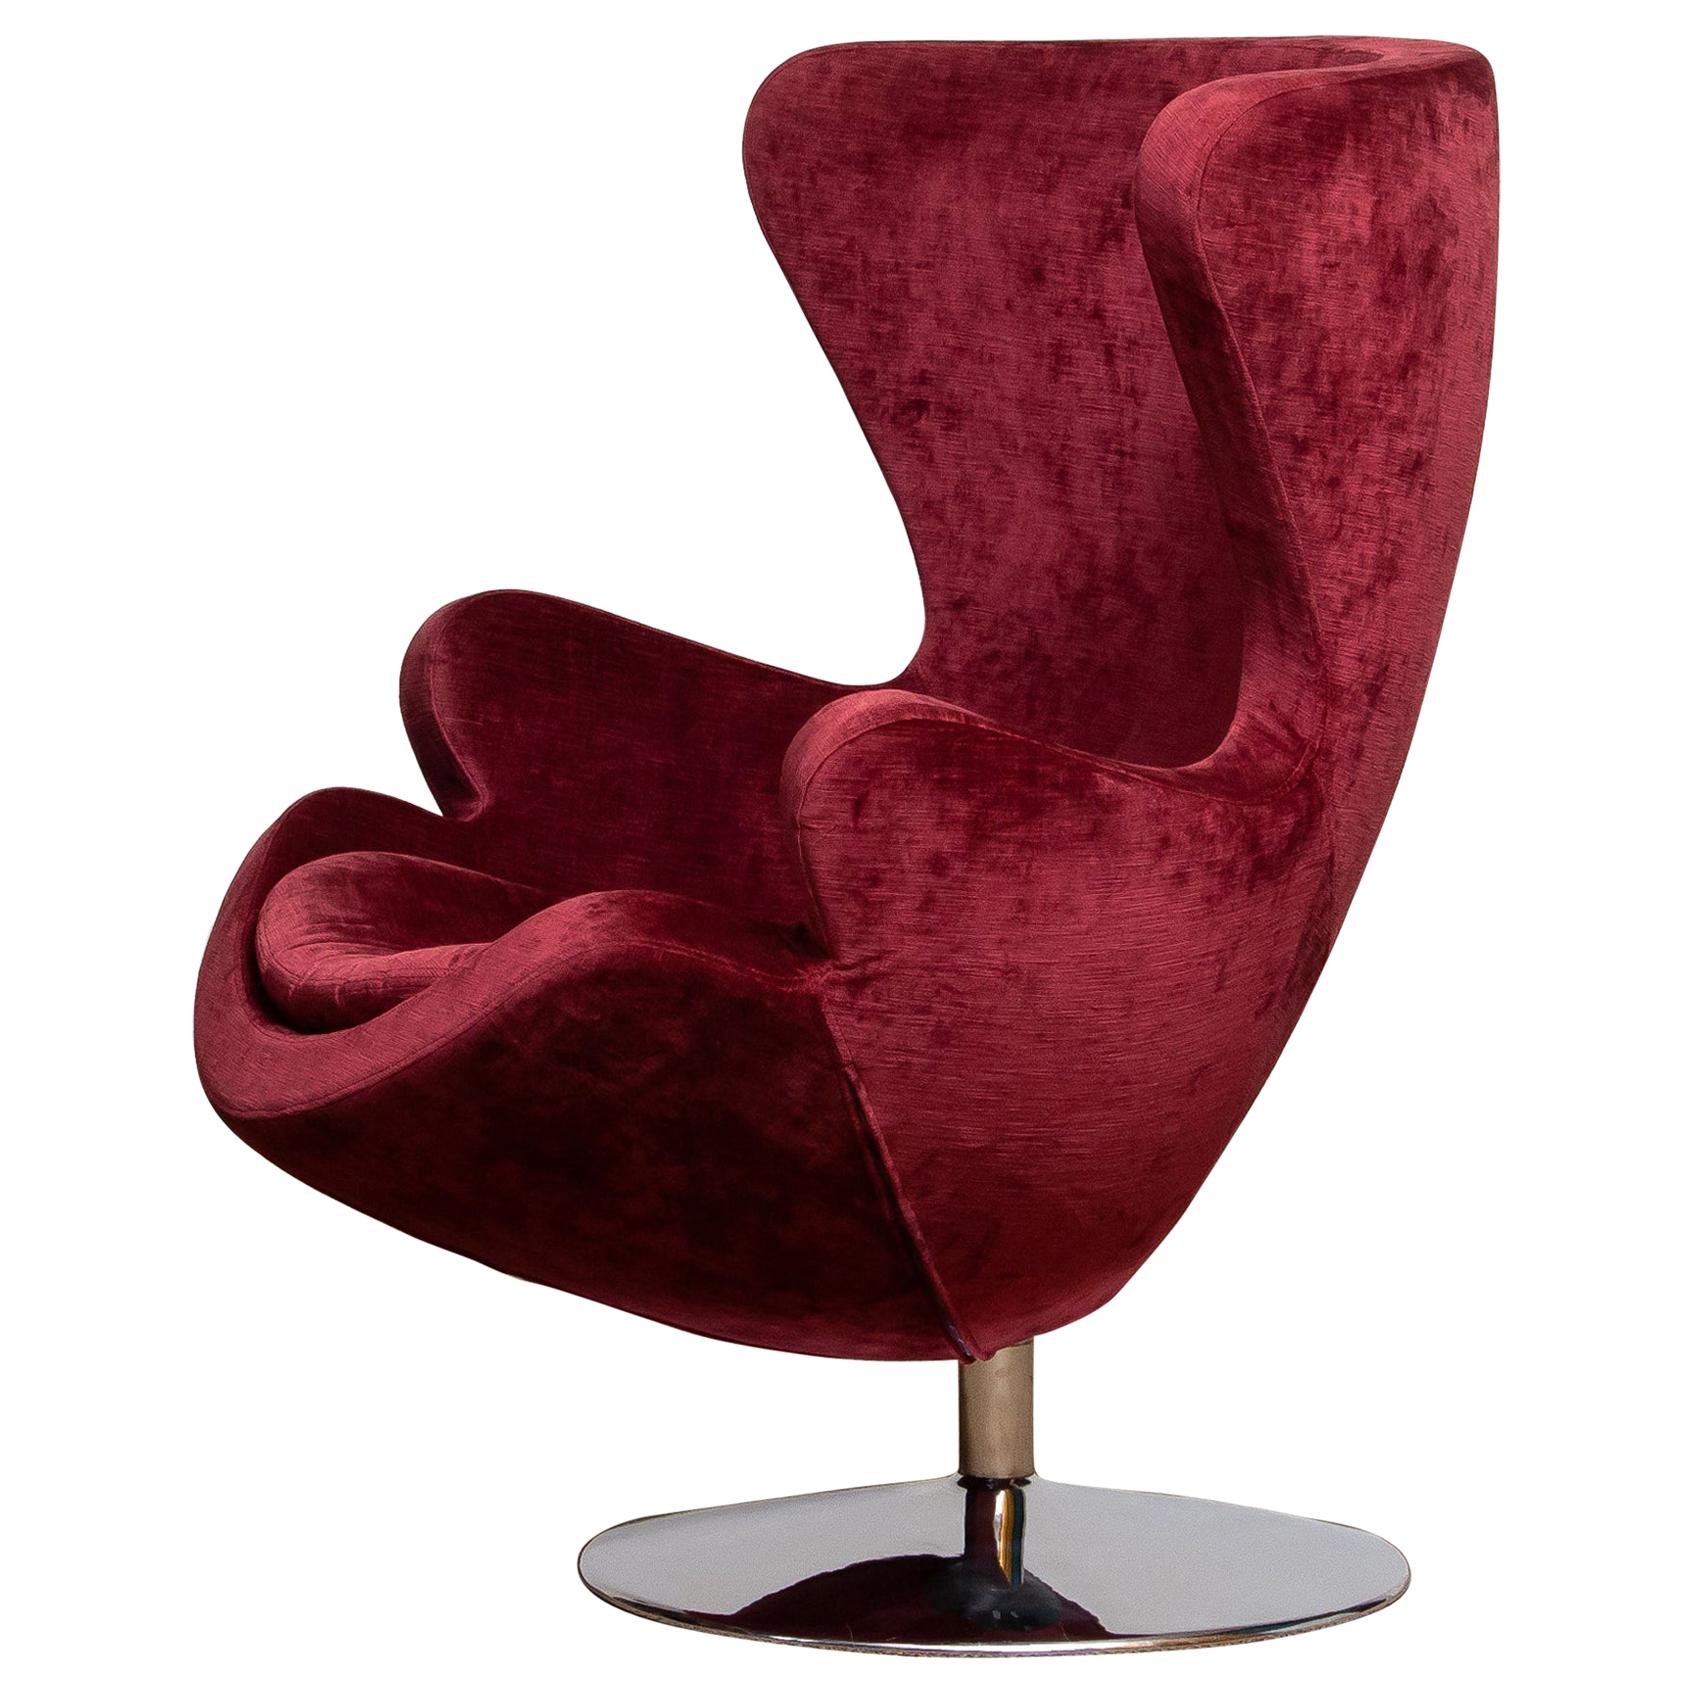 1970s, Swivel Lounge Egg Chair on Chrome Stand Colored in Bordeaux Red Baby Roy